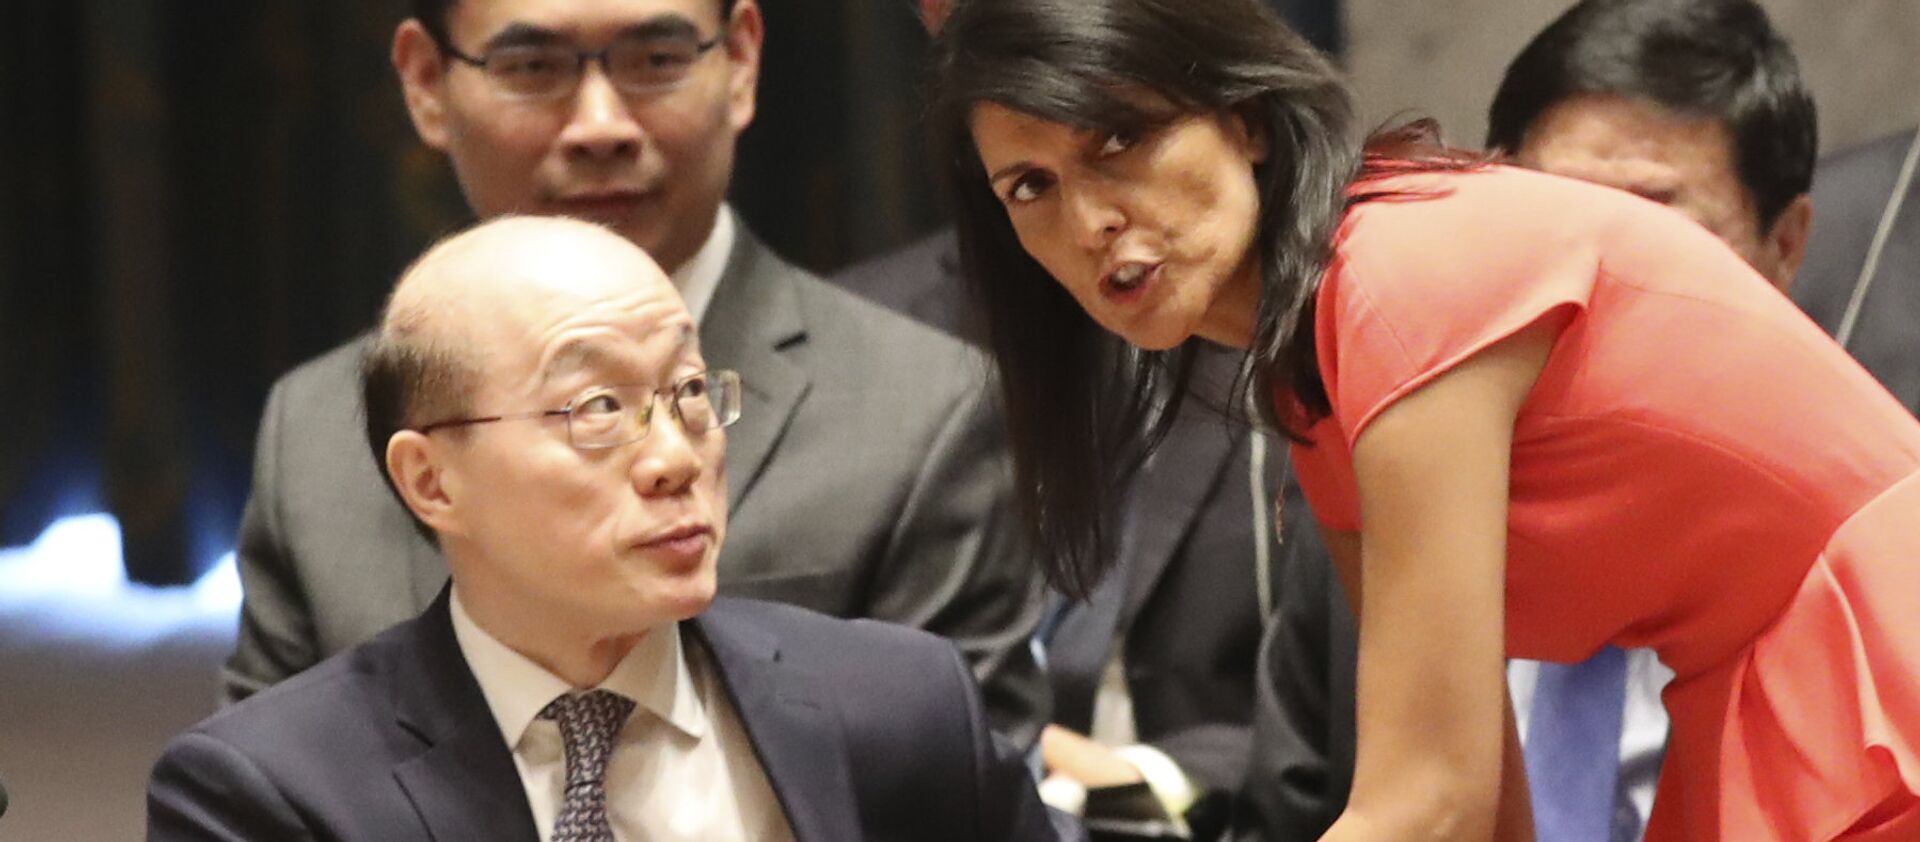 American Ambassador to the United Nations Nikki Haley, right, speaks to Chinese Ambassador to the United Nations Liu Jieyi before a Security Council vote on a new sanctions resolution that would increase economic pressure on North Korea to return to negotiations on its missile program, Saturday, Aug. 5, 2017 at U.N. headquarters - Sputnik International, 1920, 17.06.2021